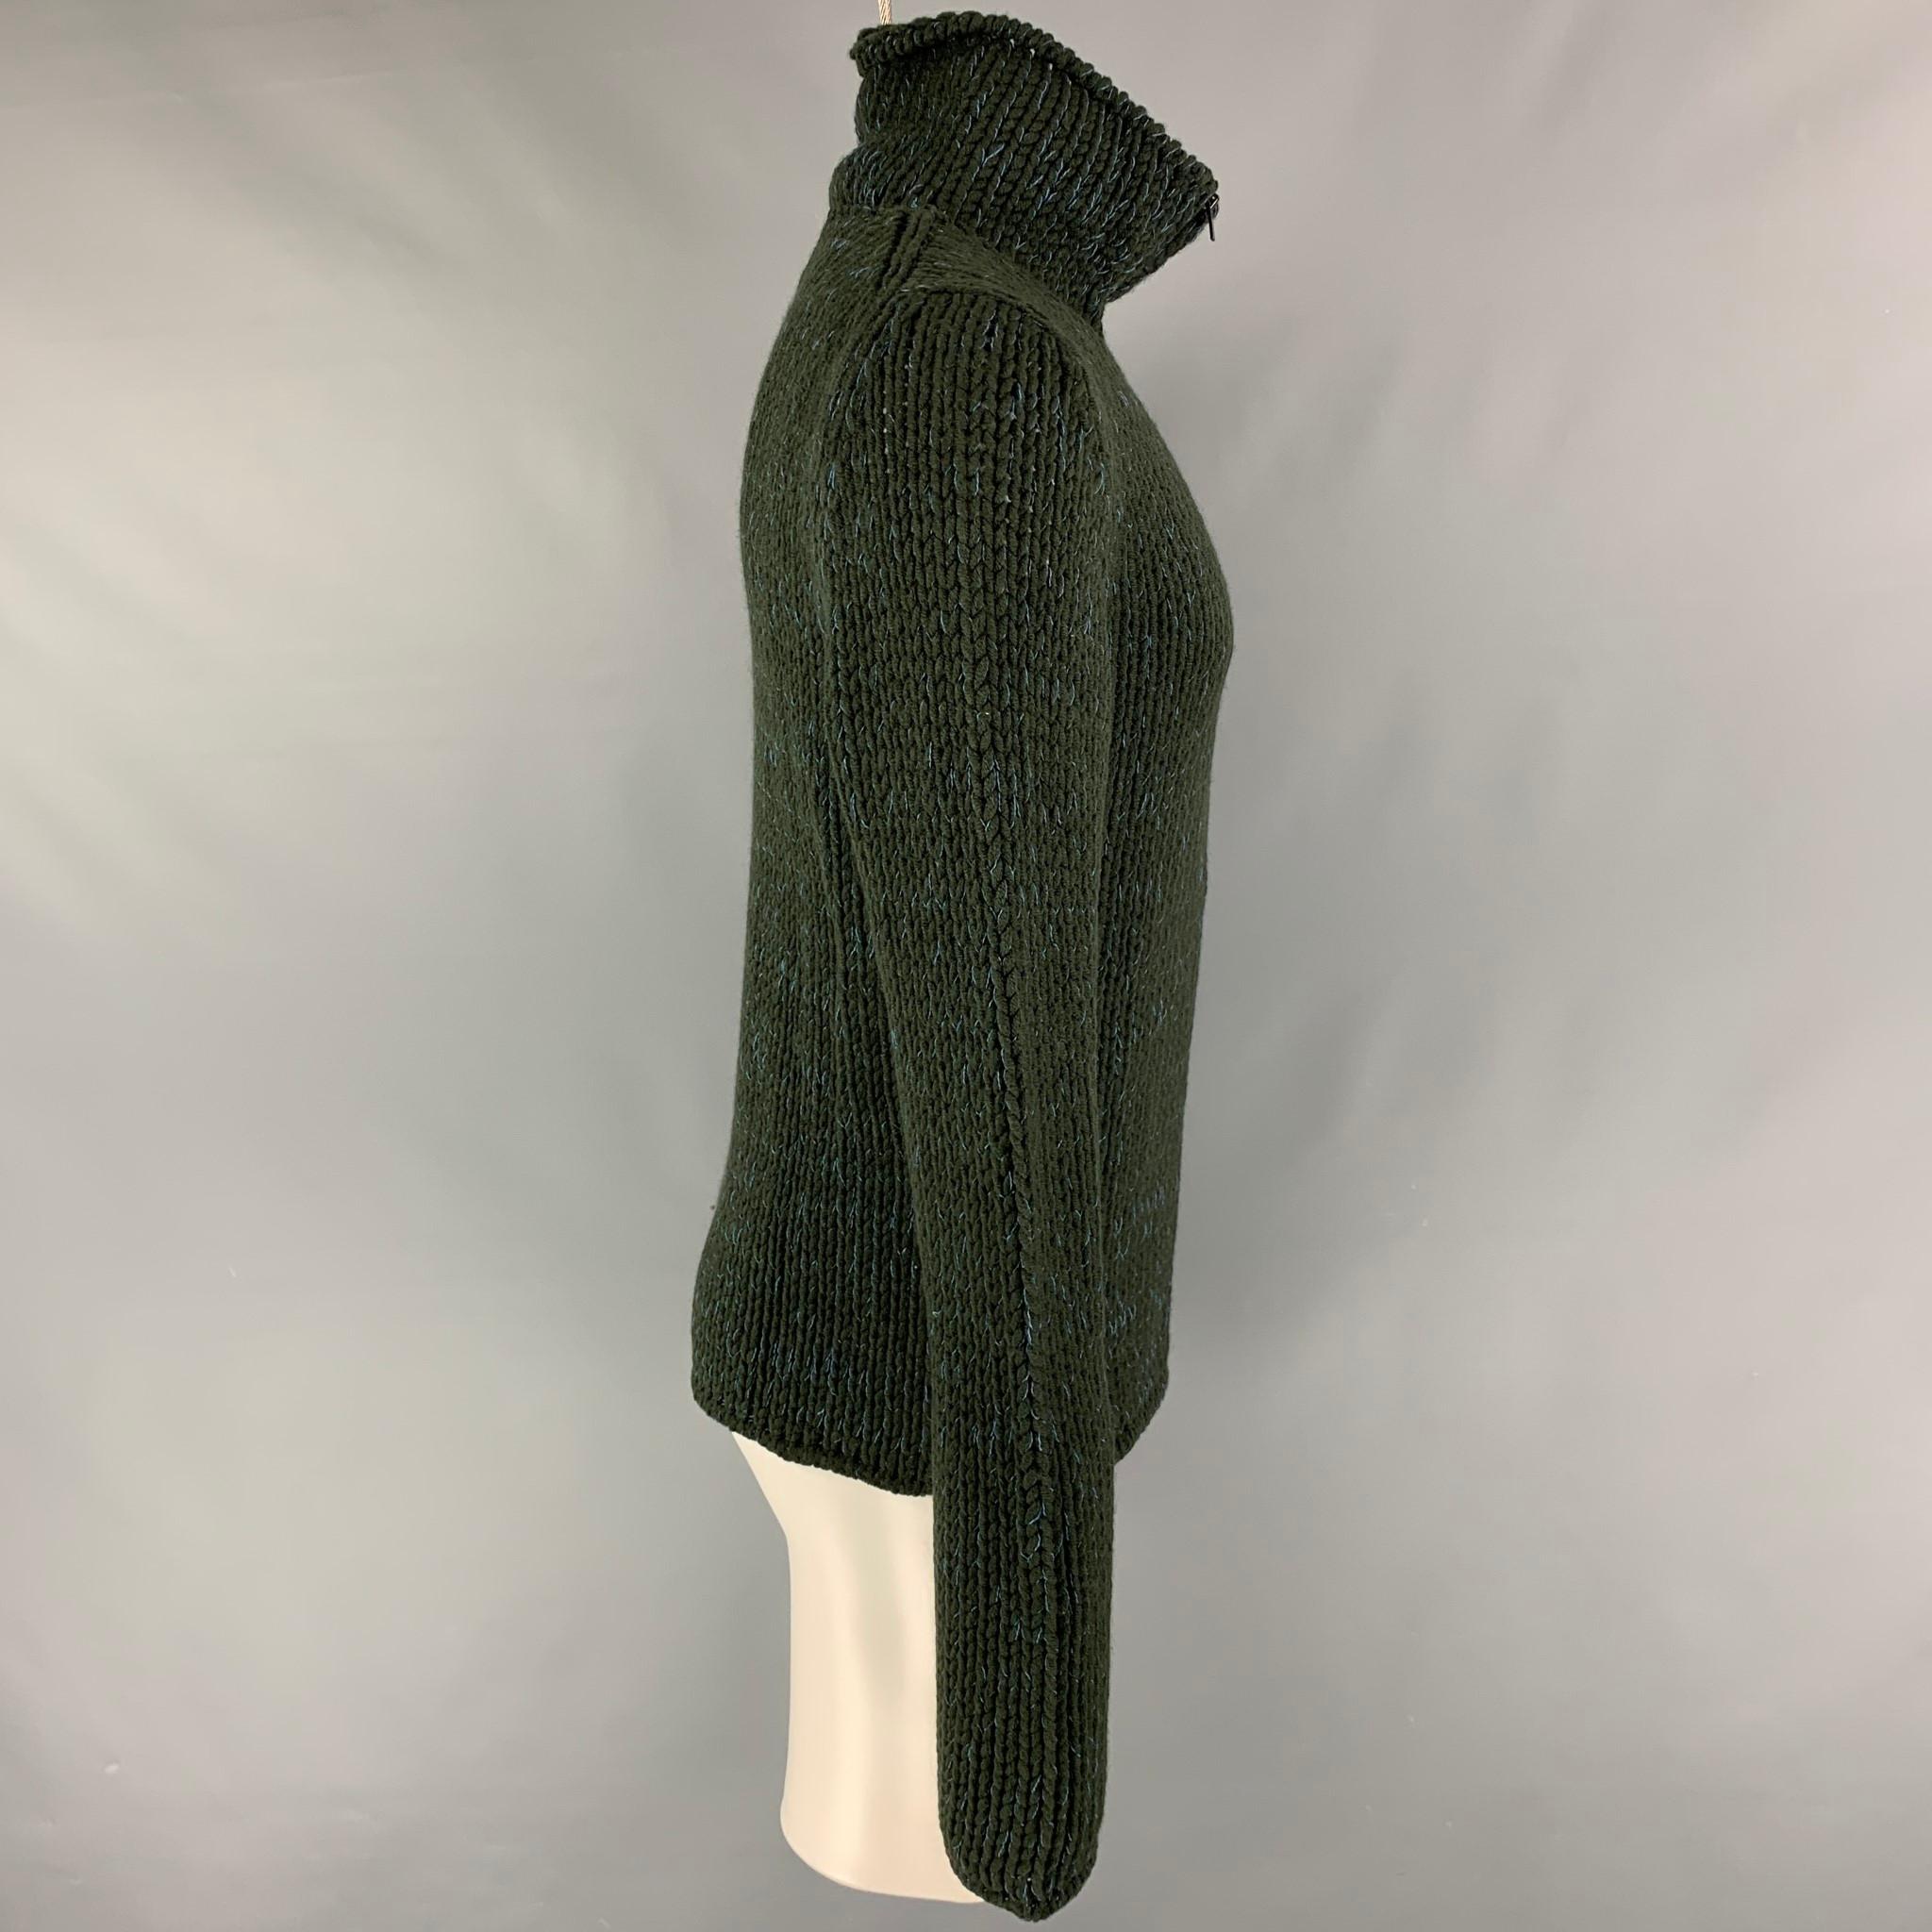 CALVIN KLEIN COLLECTION cardigan comes in a green & blue wool blend featuring a high collar and a zip up closure. Made in Italy.

Excellent Pre-Owned Condition.
Marked: M

Measurements:

Shoulder: 17 in.
Chest: 38 in.
Sleeve: 32 in.
Length: 26.5 in. 